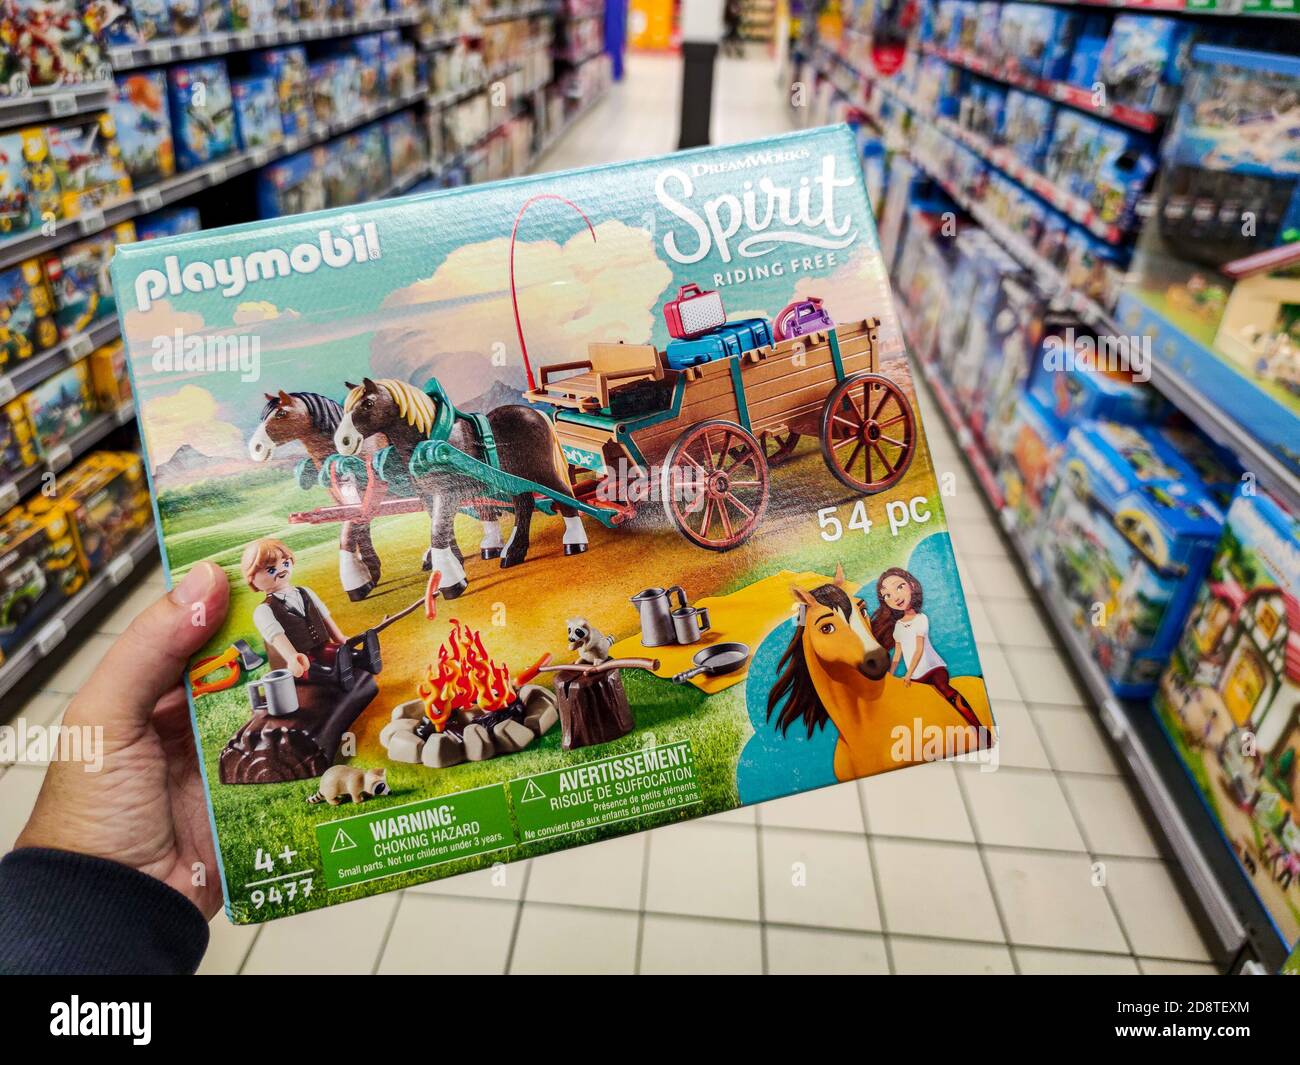 Puilboreau, France - October 14, 2020: Closeup of Man hand buying Playmobil  figurine Lego brand display for sell in french supermarket Stock Photo -  Alamy